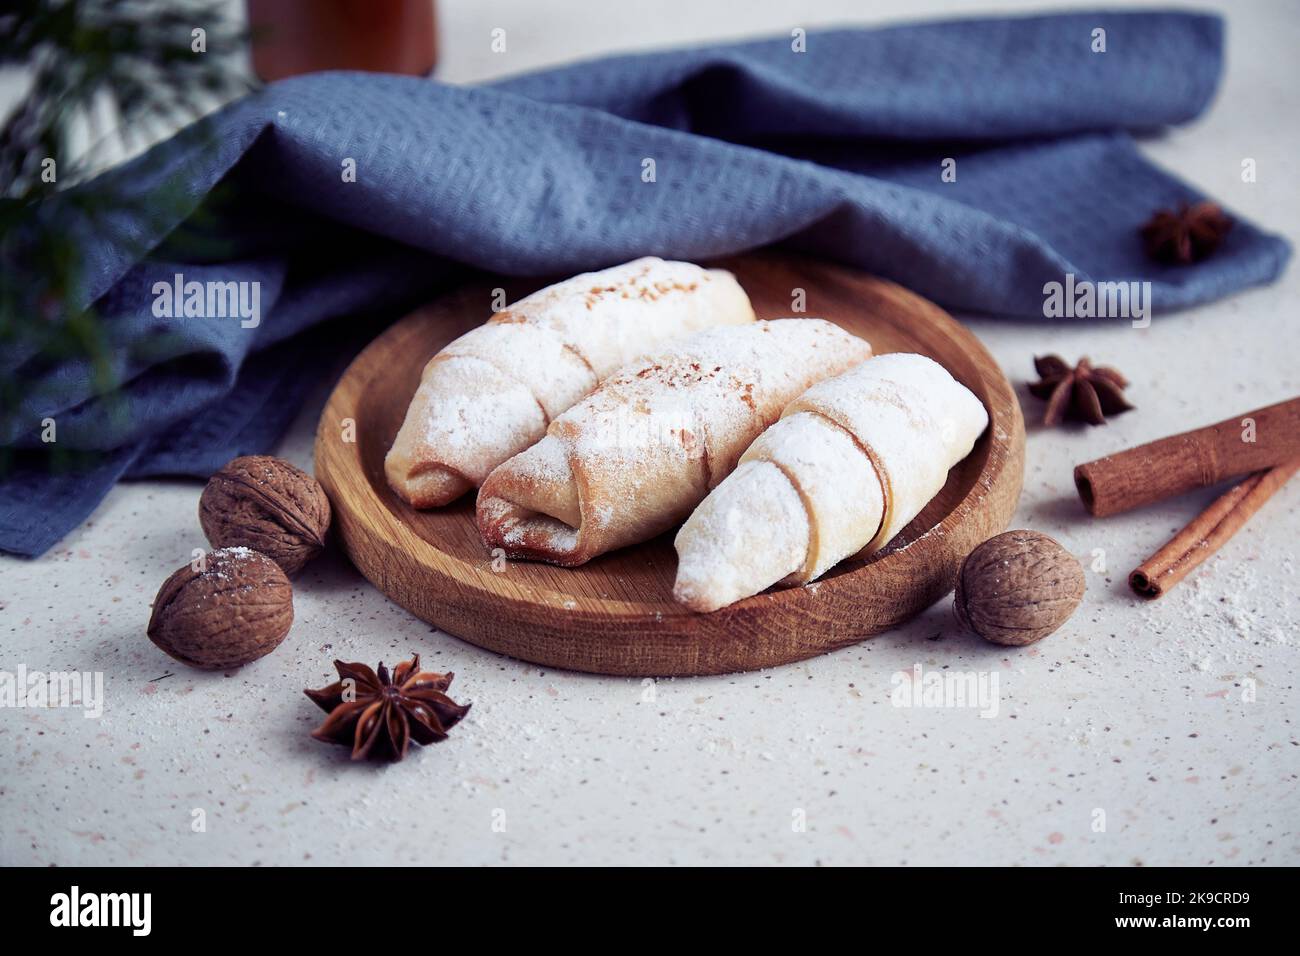 Traditional aesthetics Christmas crescent bagels with cinnamon sticks, star anise, walnuts. Stock Photo